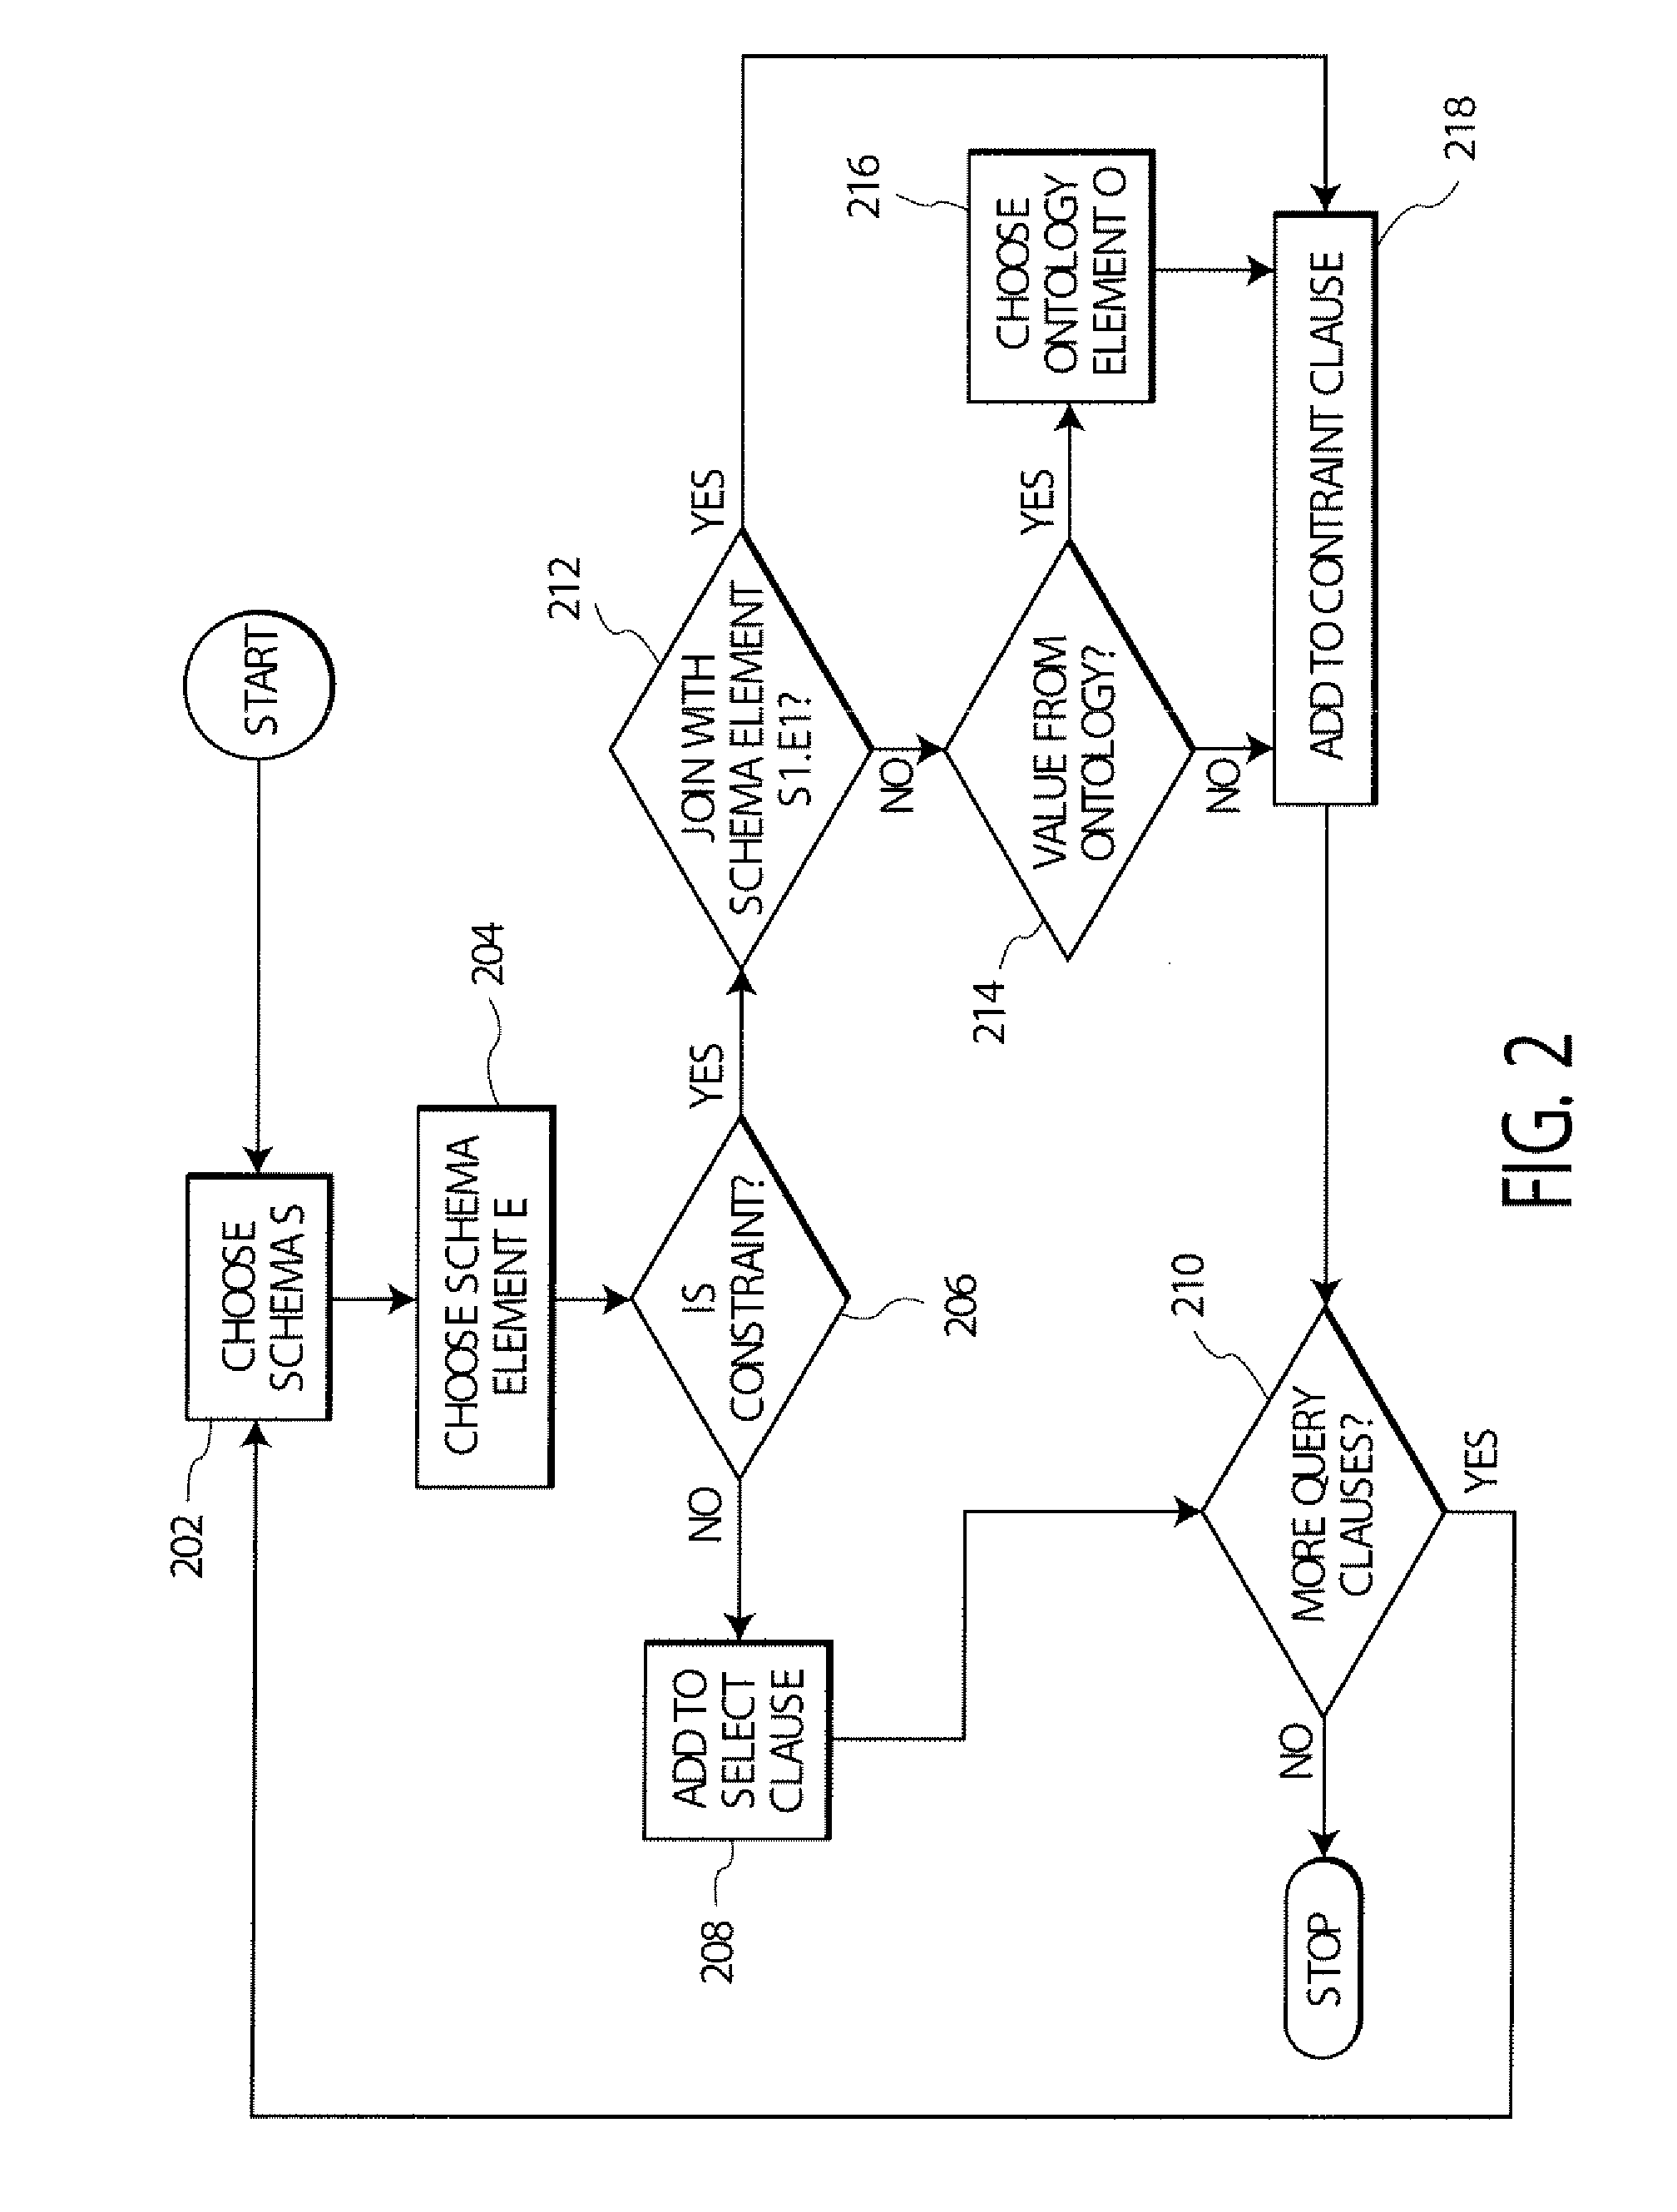 System and Method For Integrating Heterogeneous Biomedical Information